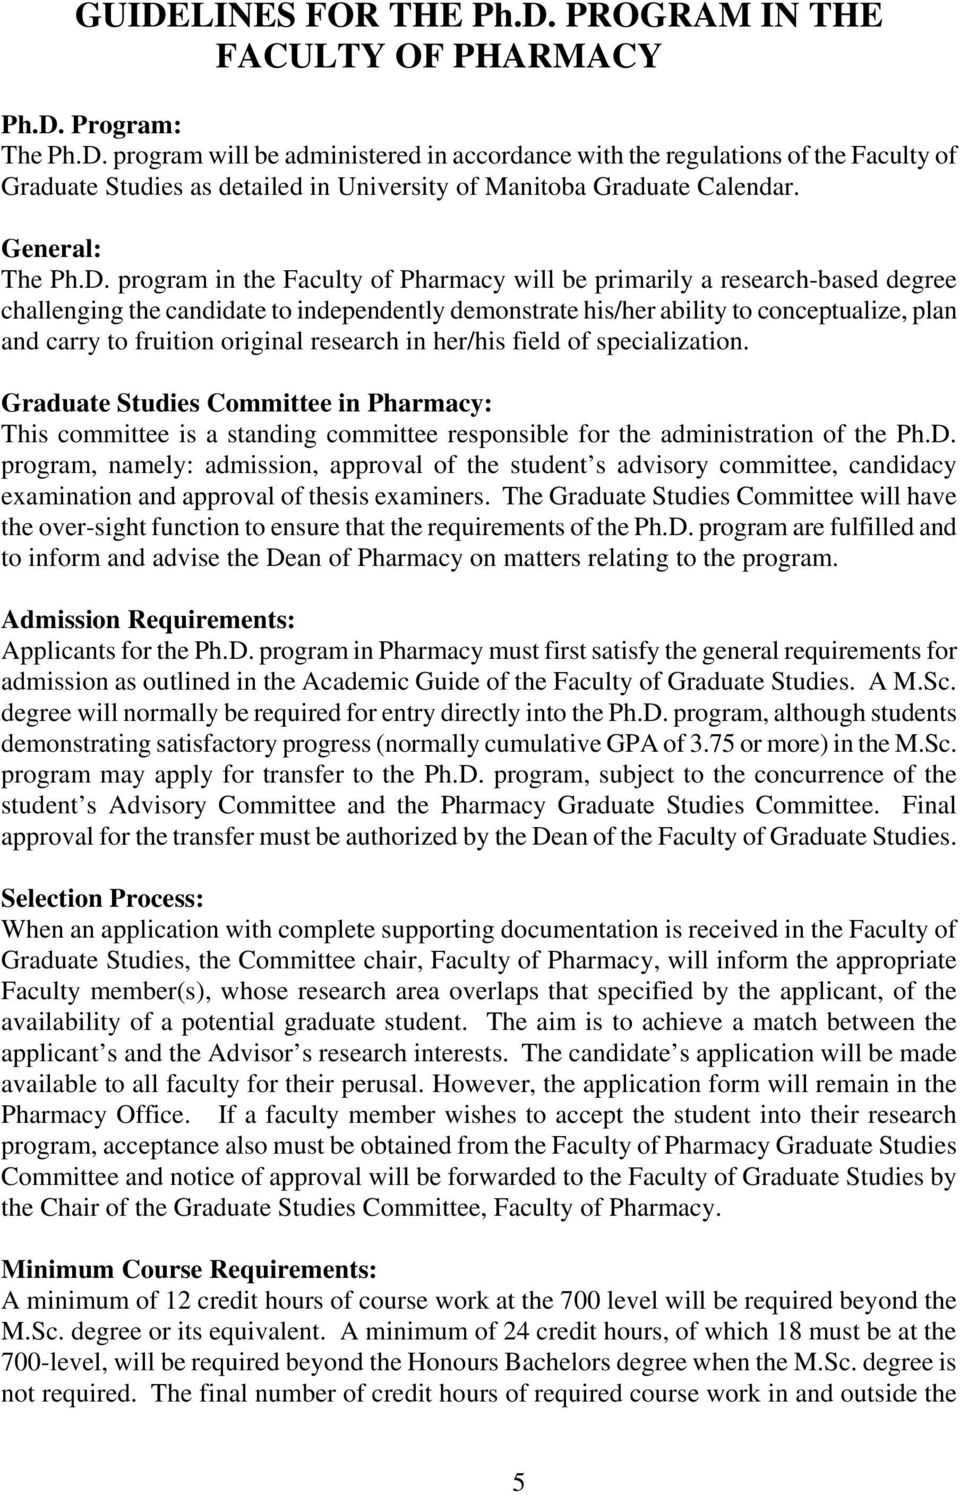 program in the Faculty of Pharmacy will be primarily a research-based degree challenging the candidate to independently demonstrate his/her ability to conceptualize, plan and carry to fruition